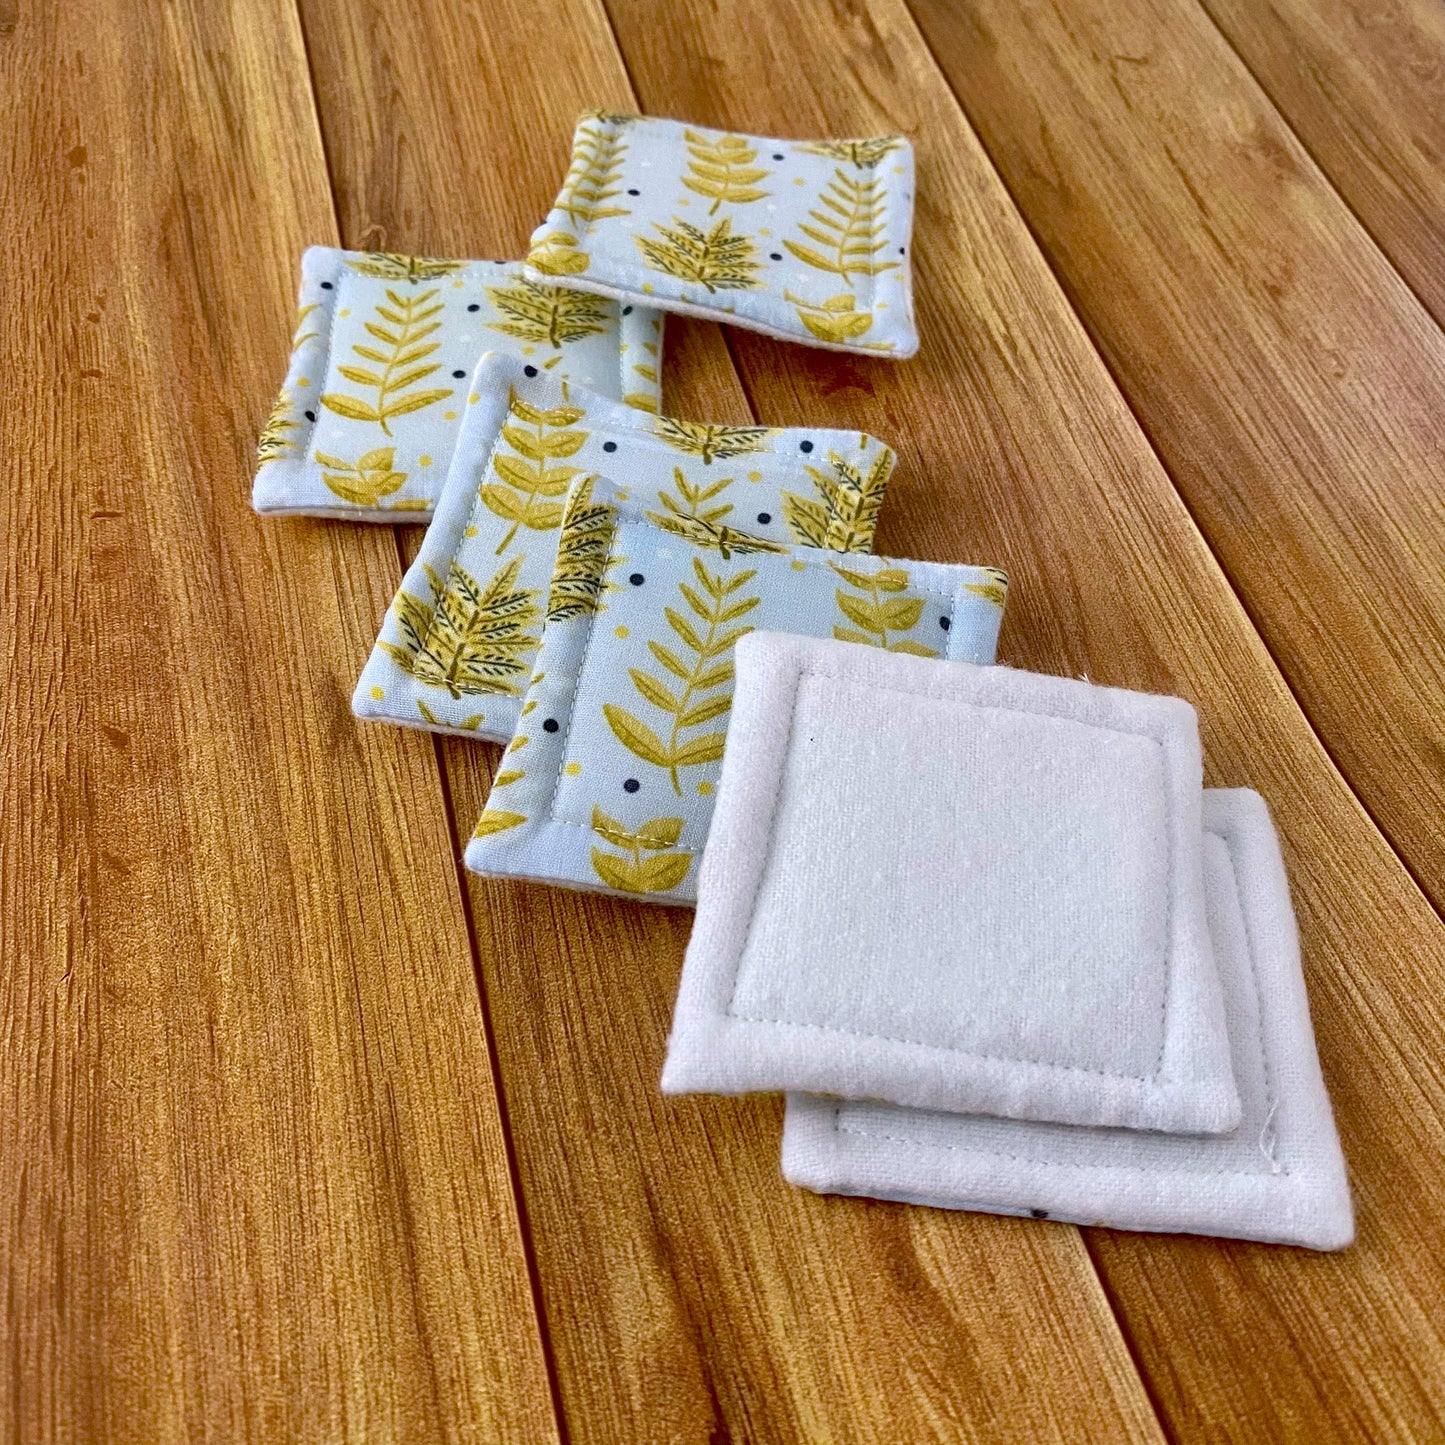 reusable skincare pads shown on a wooden background with two turned over to show the white brushed cotton side